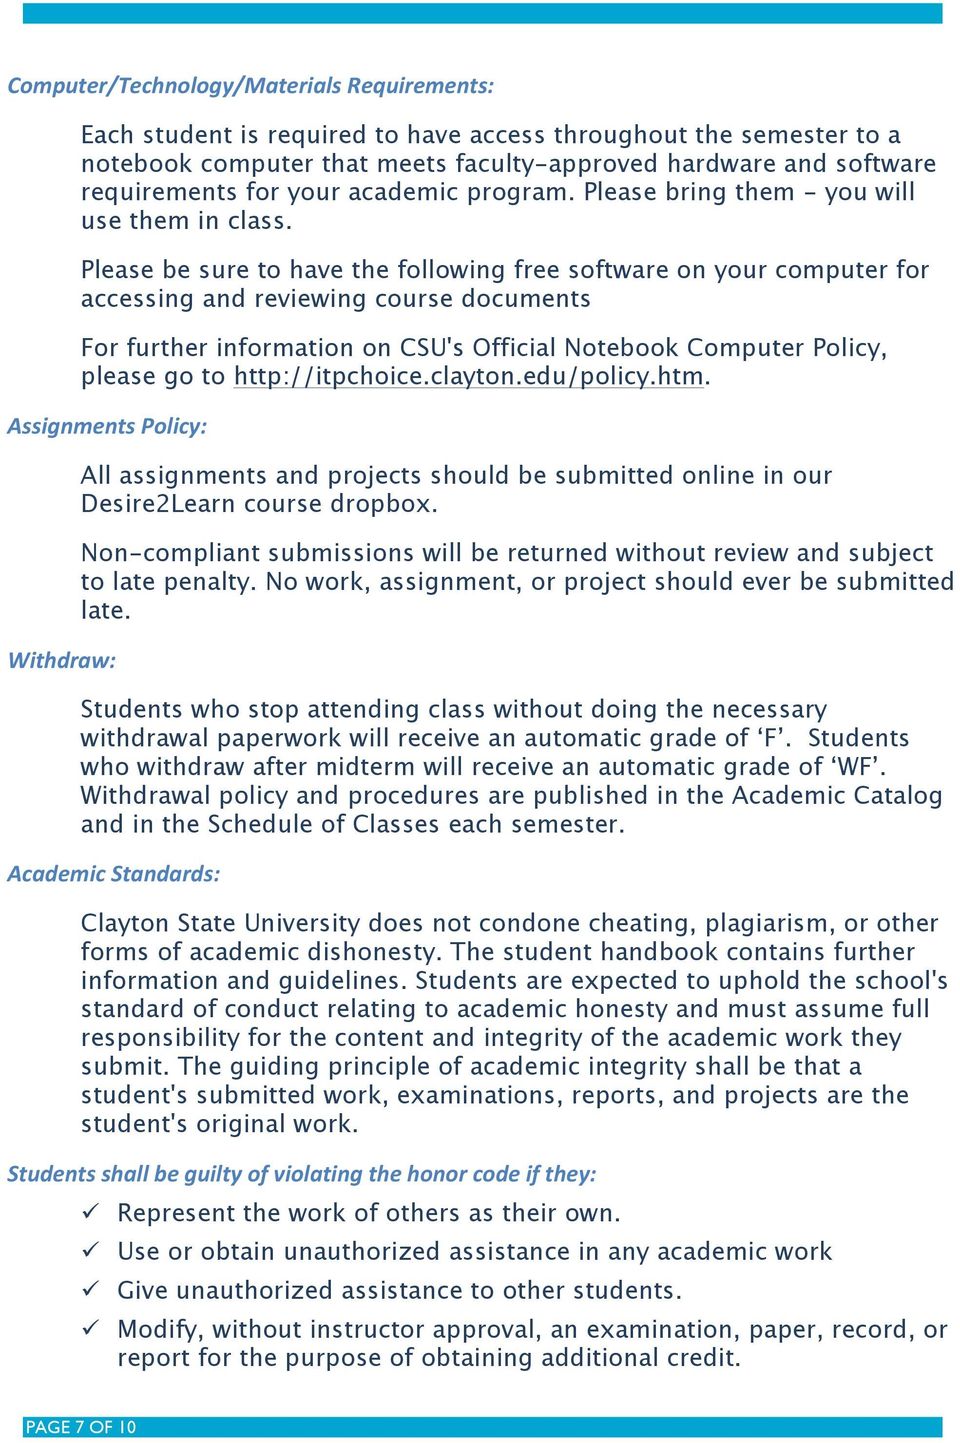 Please be sure to have the following free software on your computer for accessing and reviewing course documents For further information on CSU's Official Notebook Computer Policy, please go to